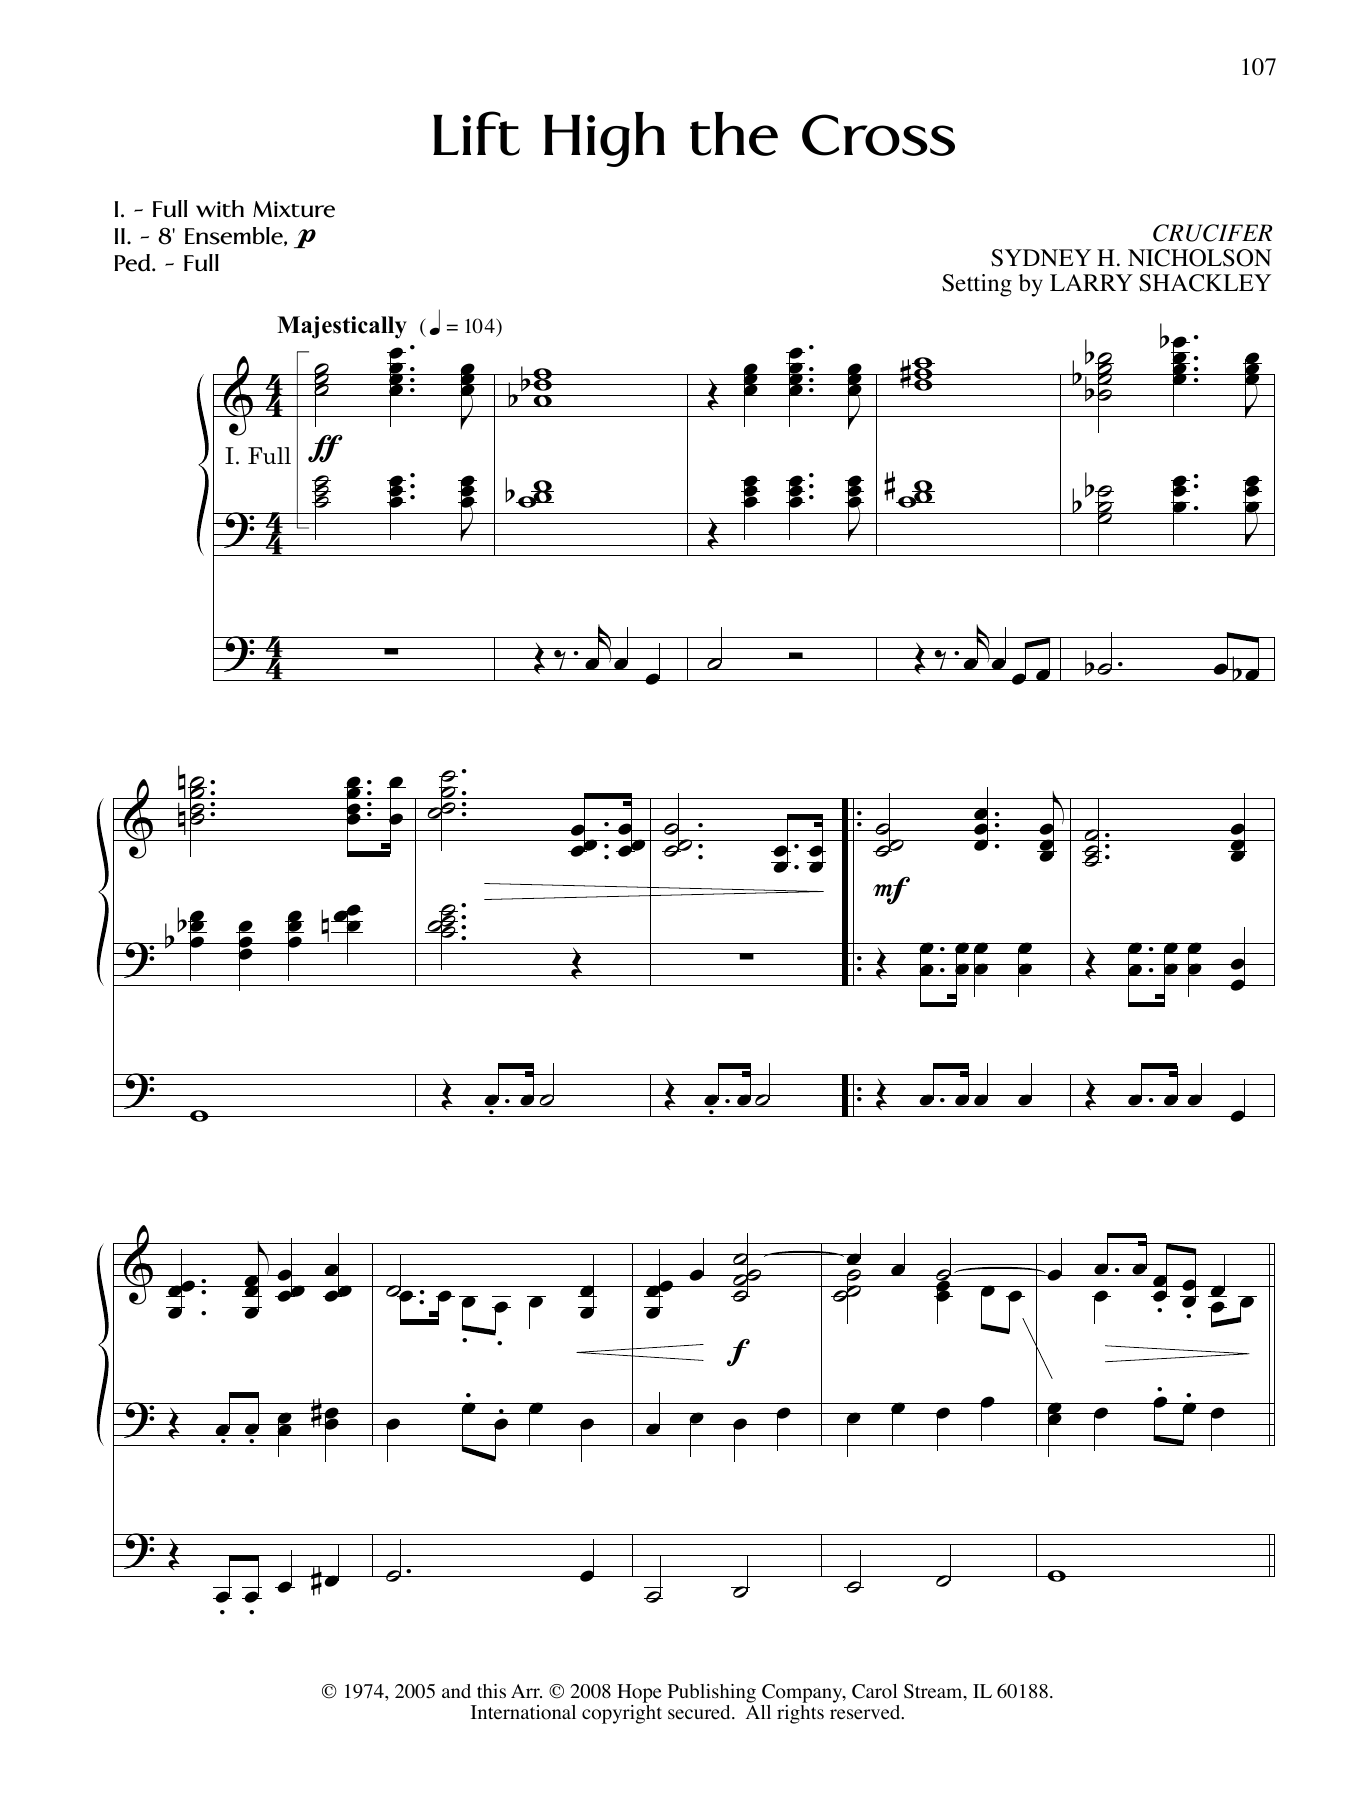 Download Larry Shackley Lift High the Cross Sheet Music